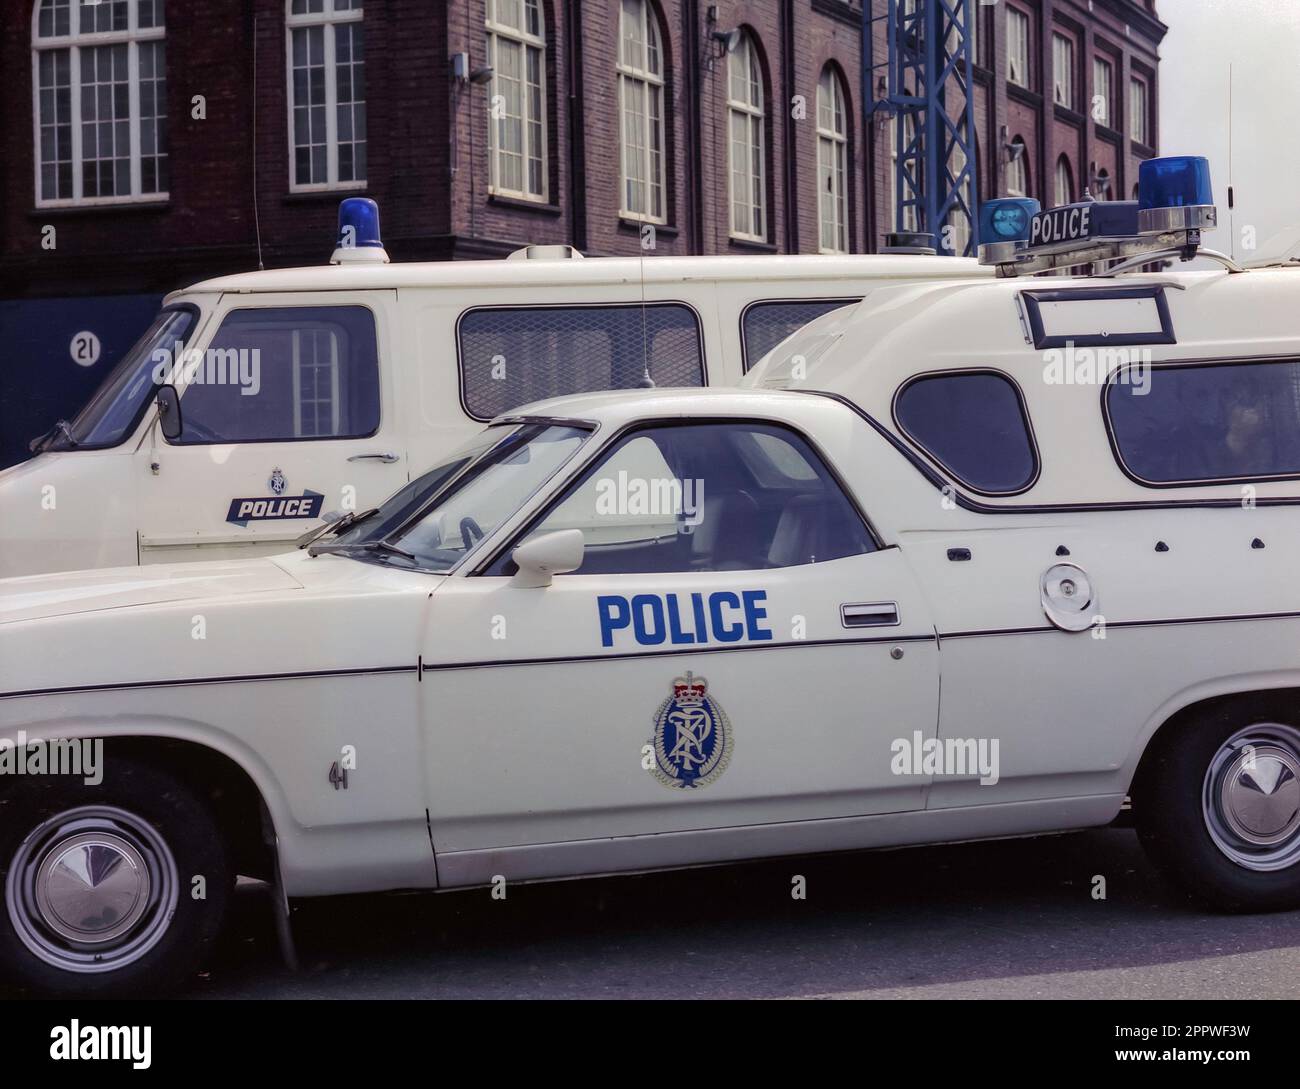 A 1981 historic image of two police vehicles parked in Wellington, the capital city of New Zealand. In the foreground is an X Series Ford Falcon utility (ute), possibly an XA or XB model with a cab on the back most likely in use as a patrol wagon. Behind it is a Ford Transit van Stock Photo